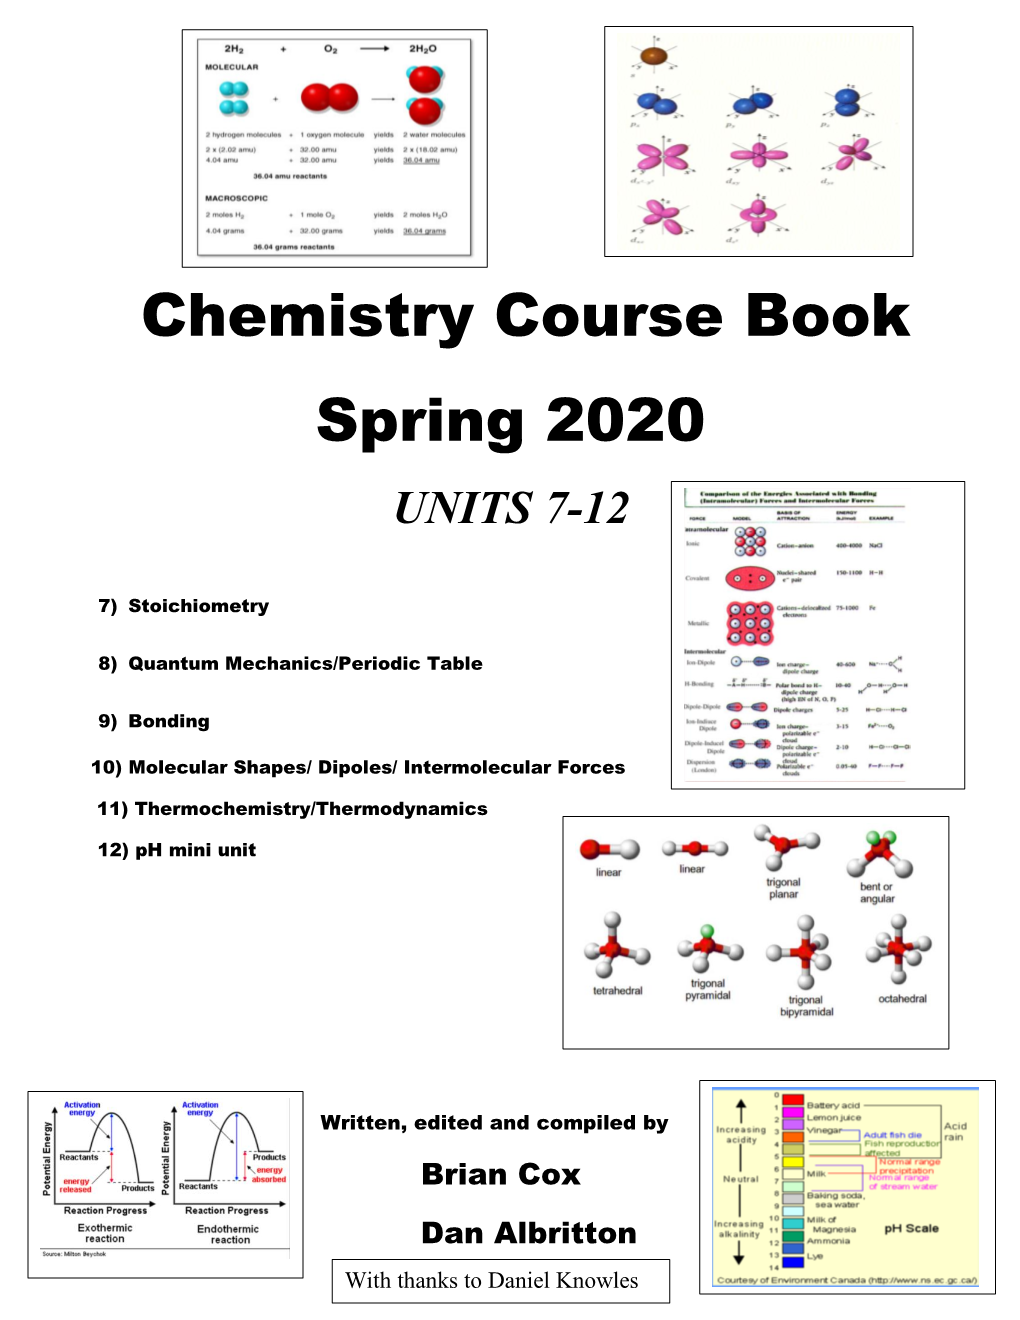 Chemistry Course Book Spring 2020 UNITS 7-12